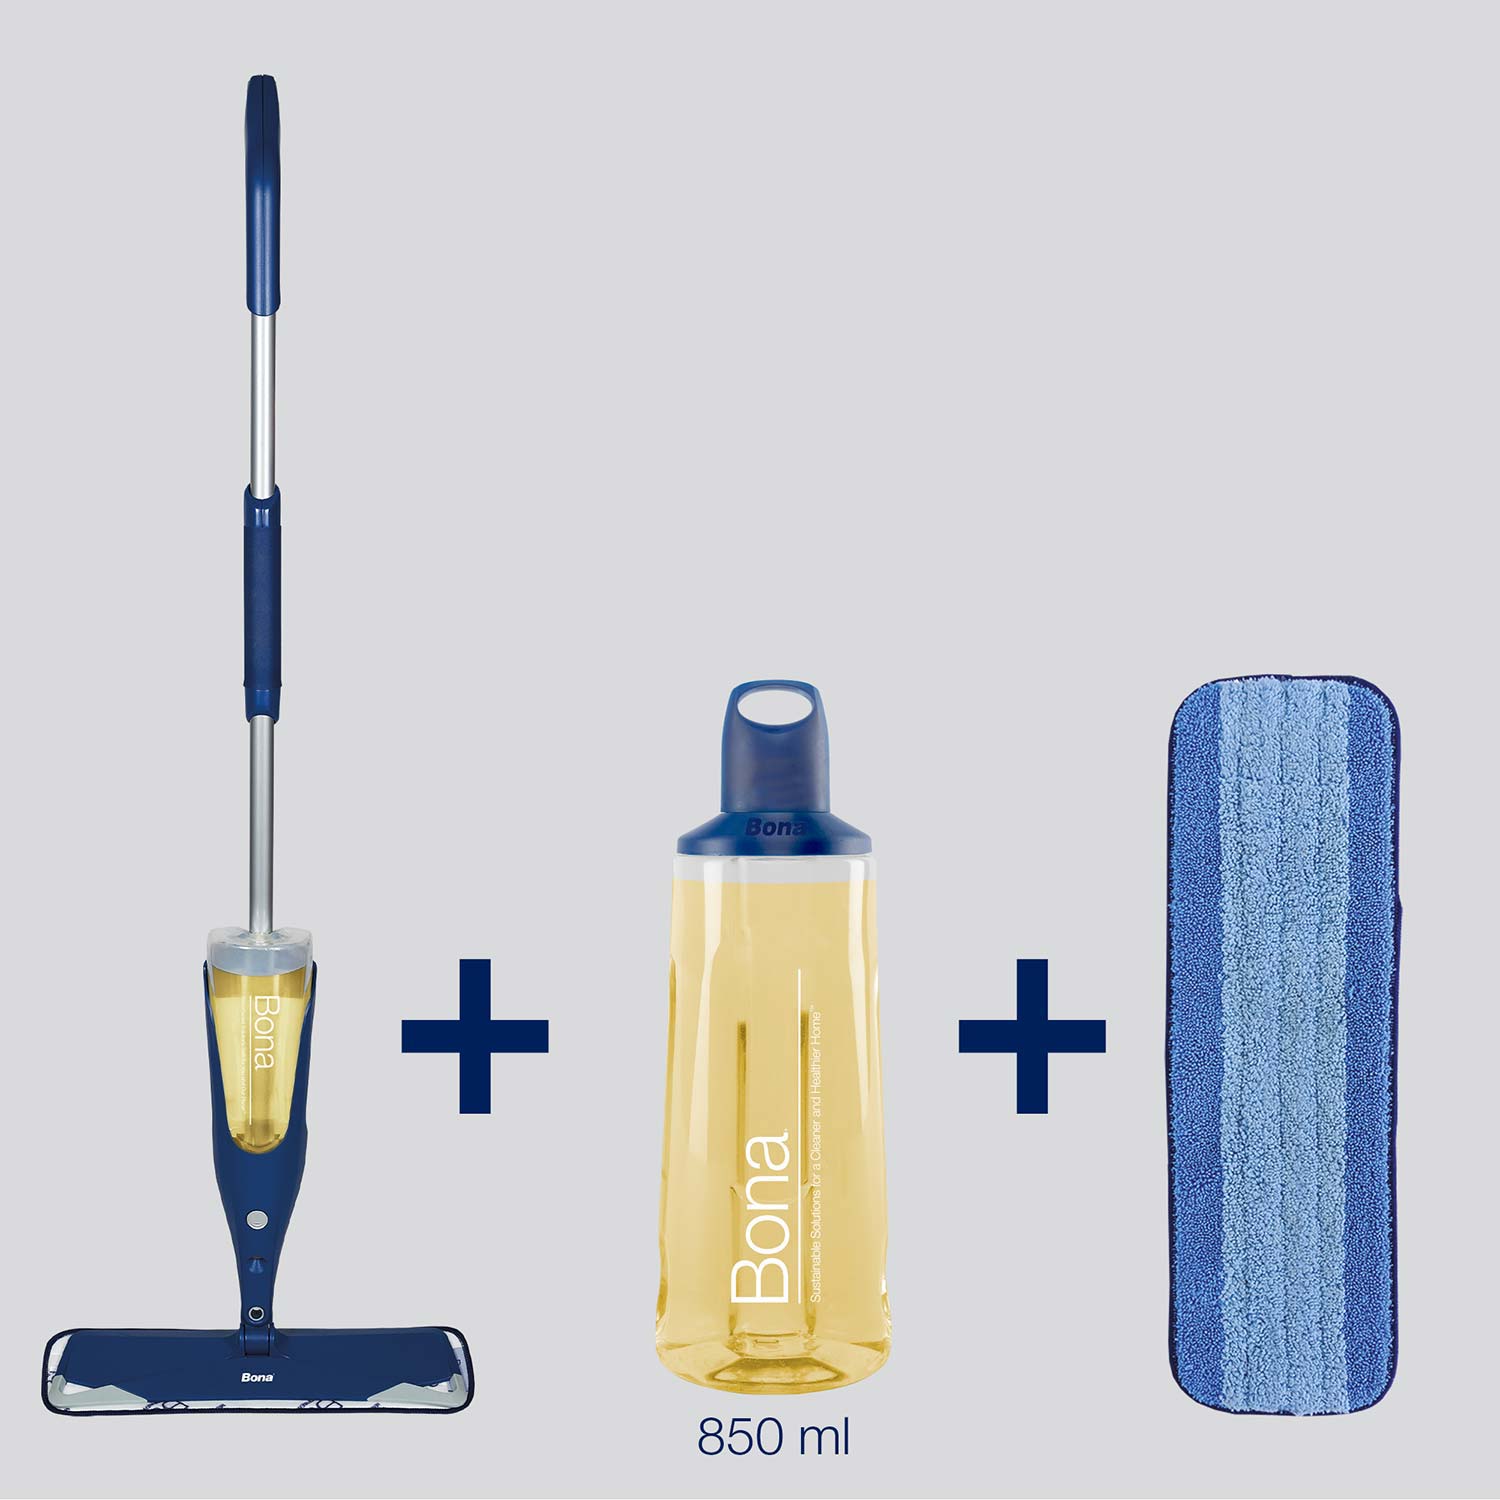 All-In-One System OR Pre-filled Cartridge OR Ready to Use_Bona Premium Spray Mop_Oiled Wood